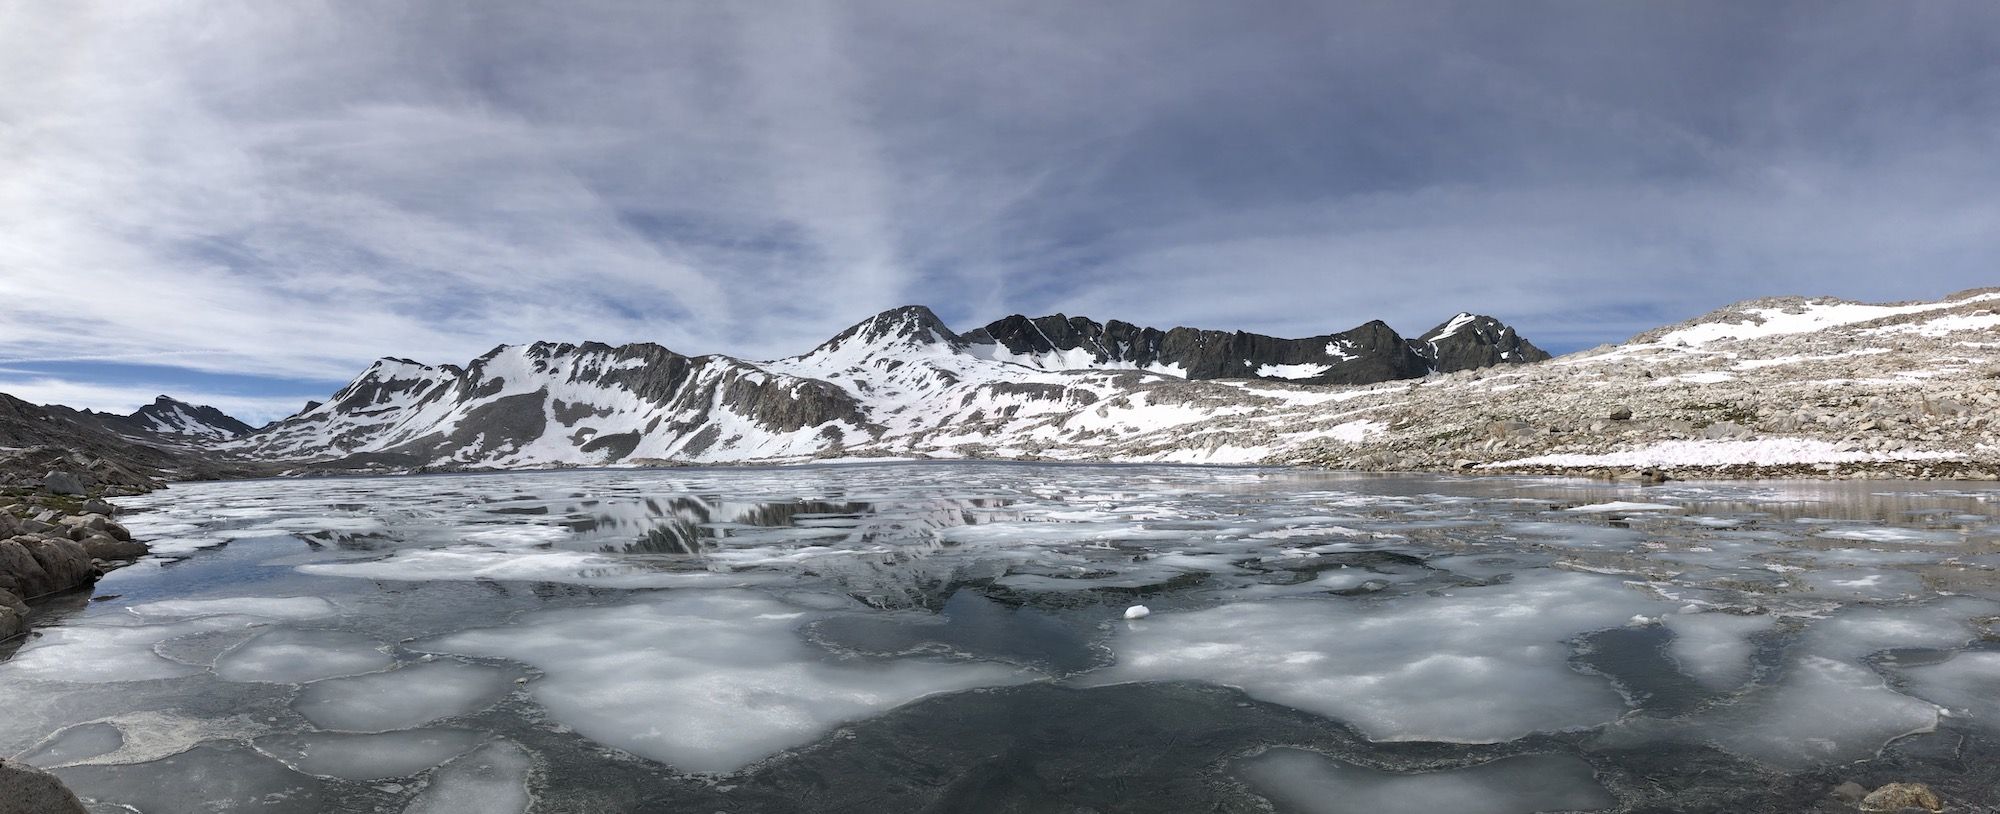 A partially frozen lake with snowy mountains in the background